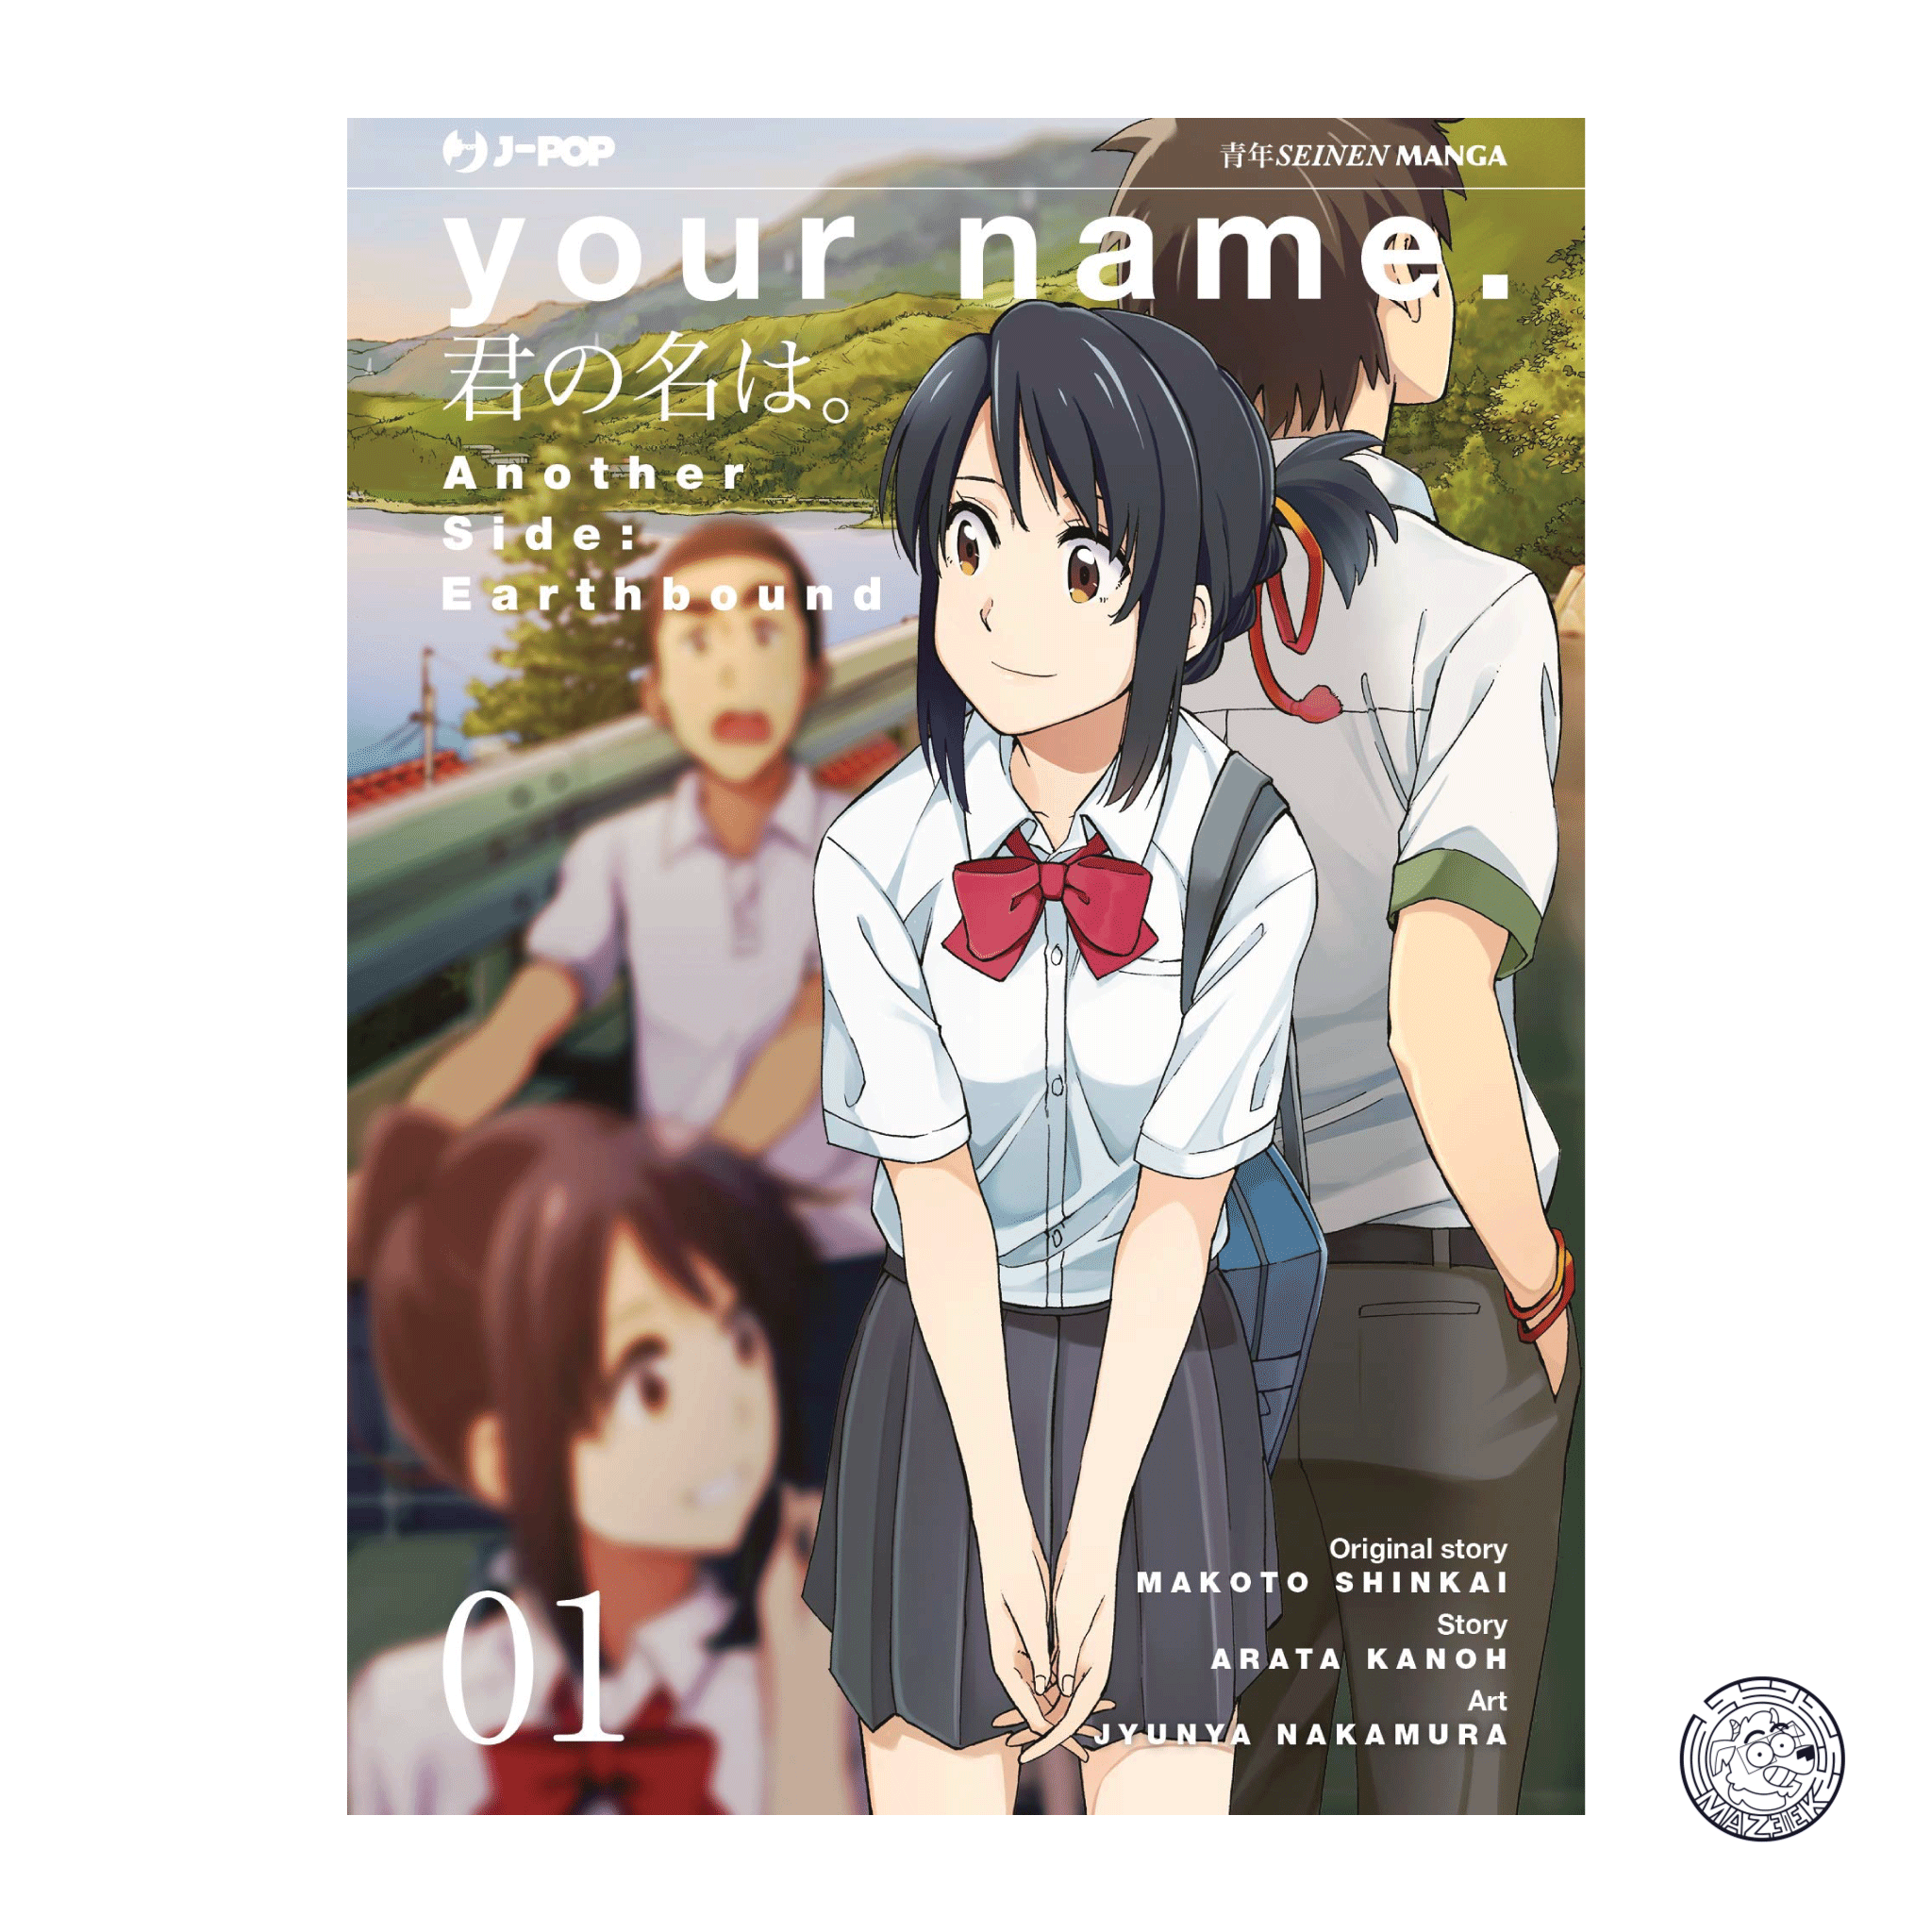 Your Name, Another Side: Earthbound 01